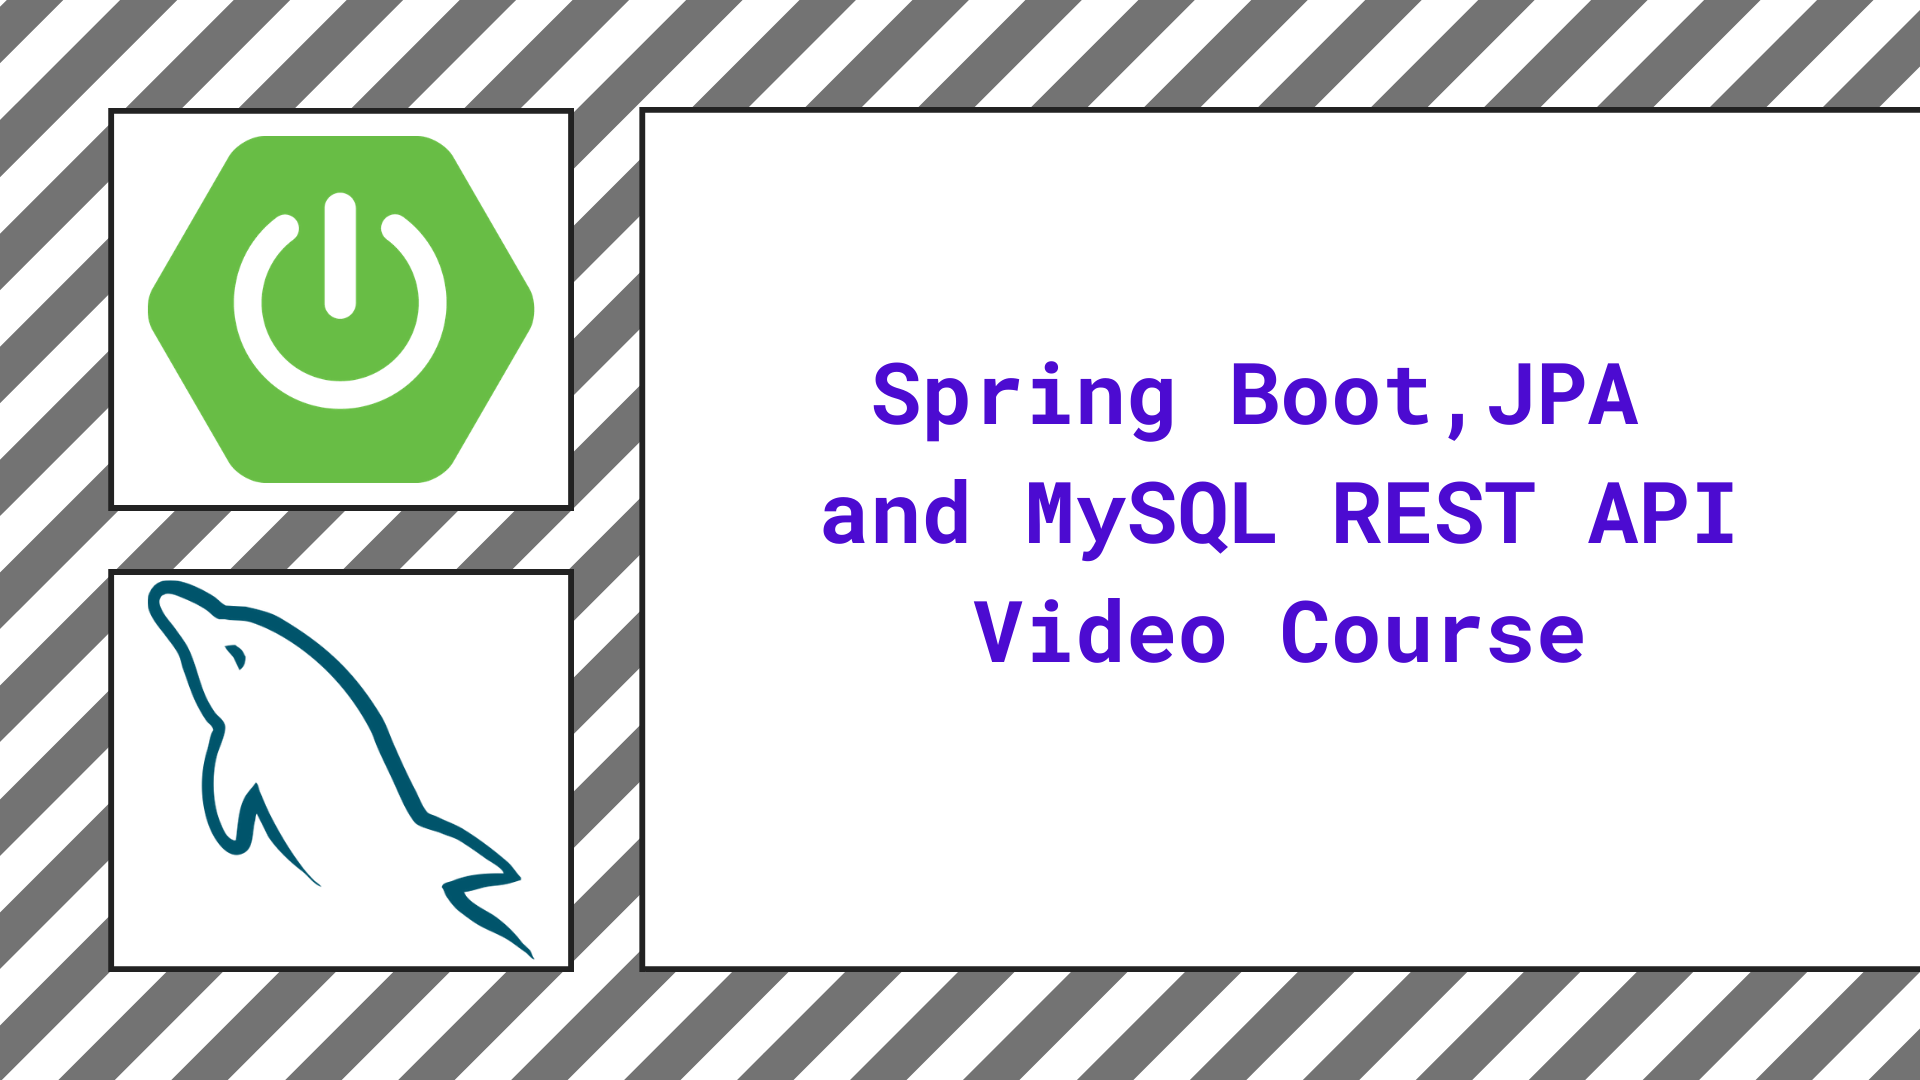 Spring Boot and JPA Video Course – B2 Tech